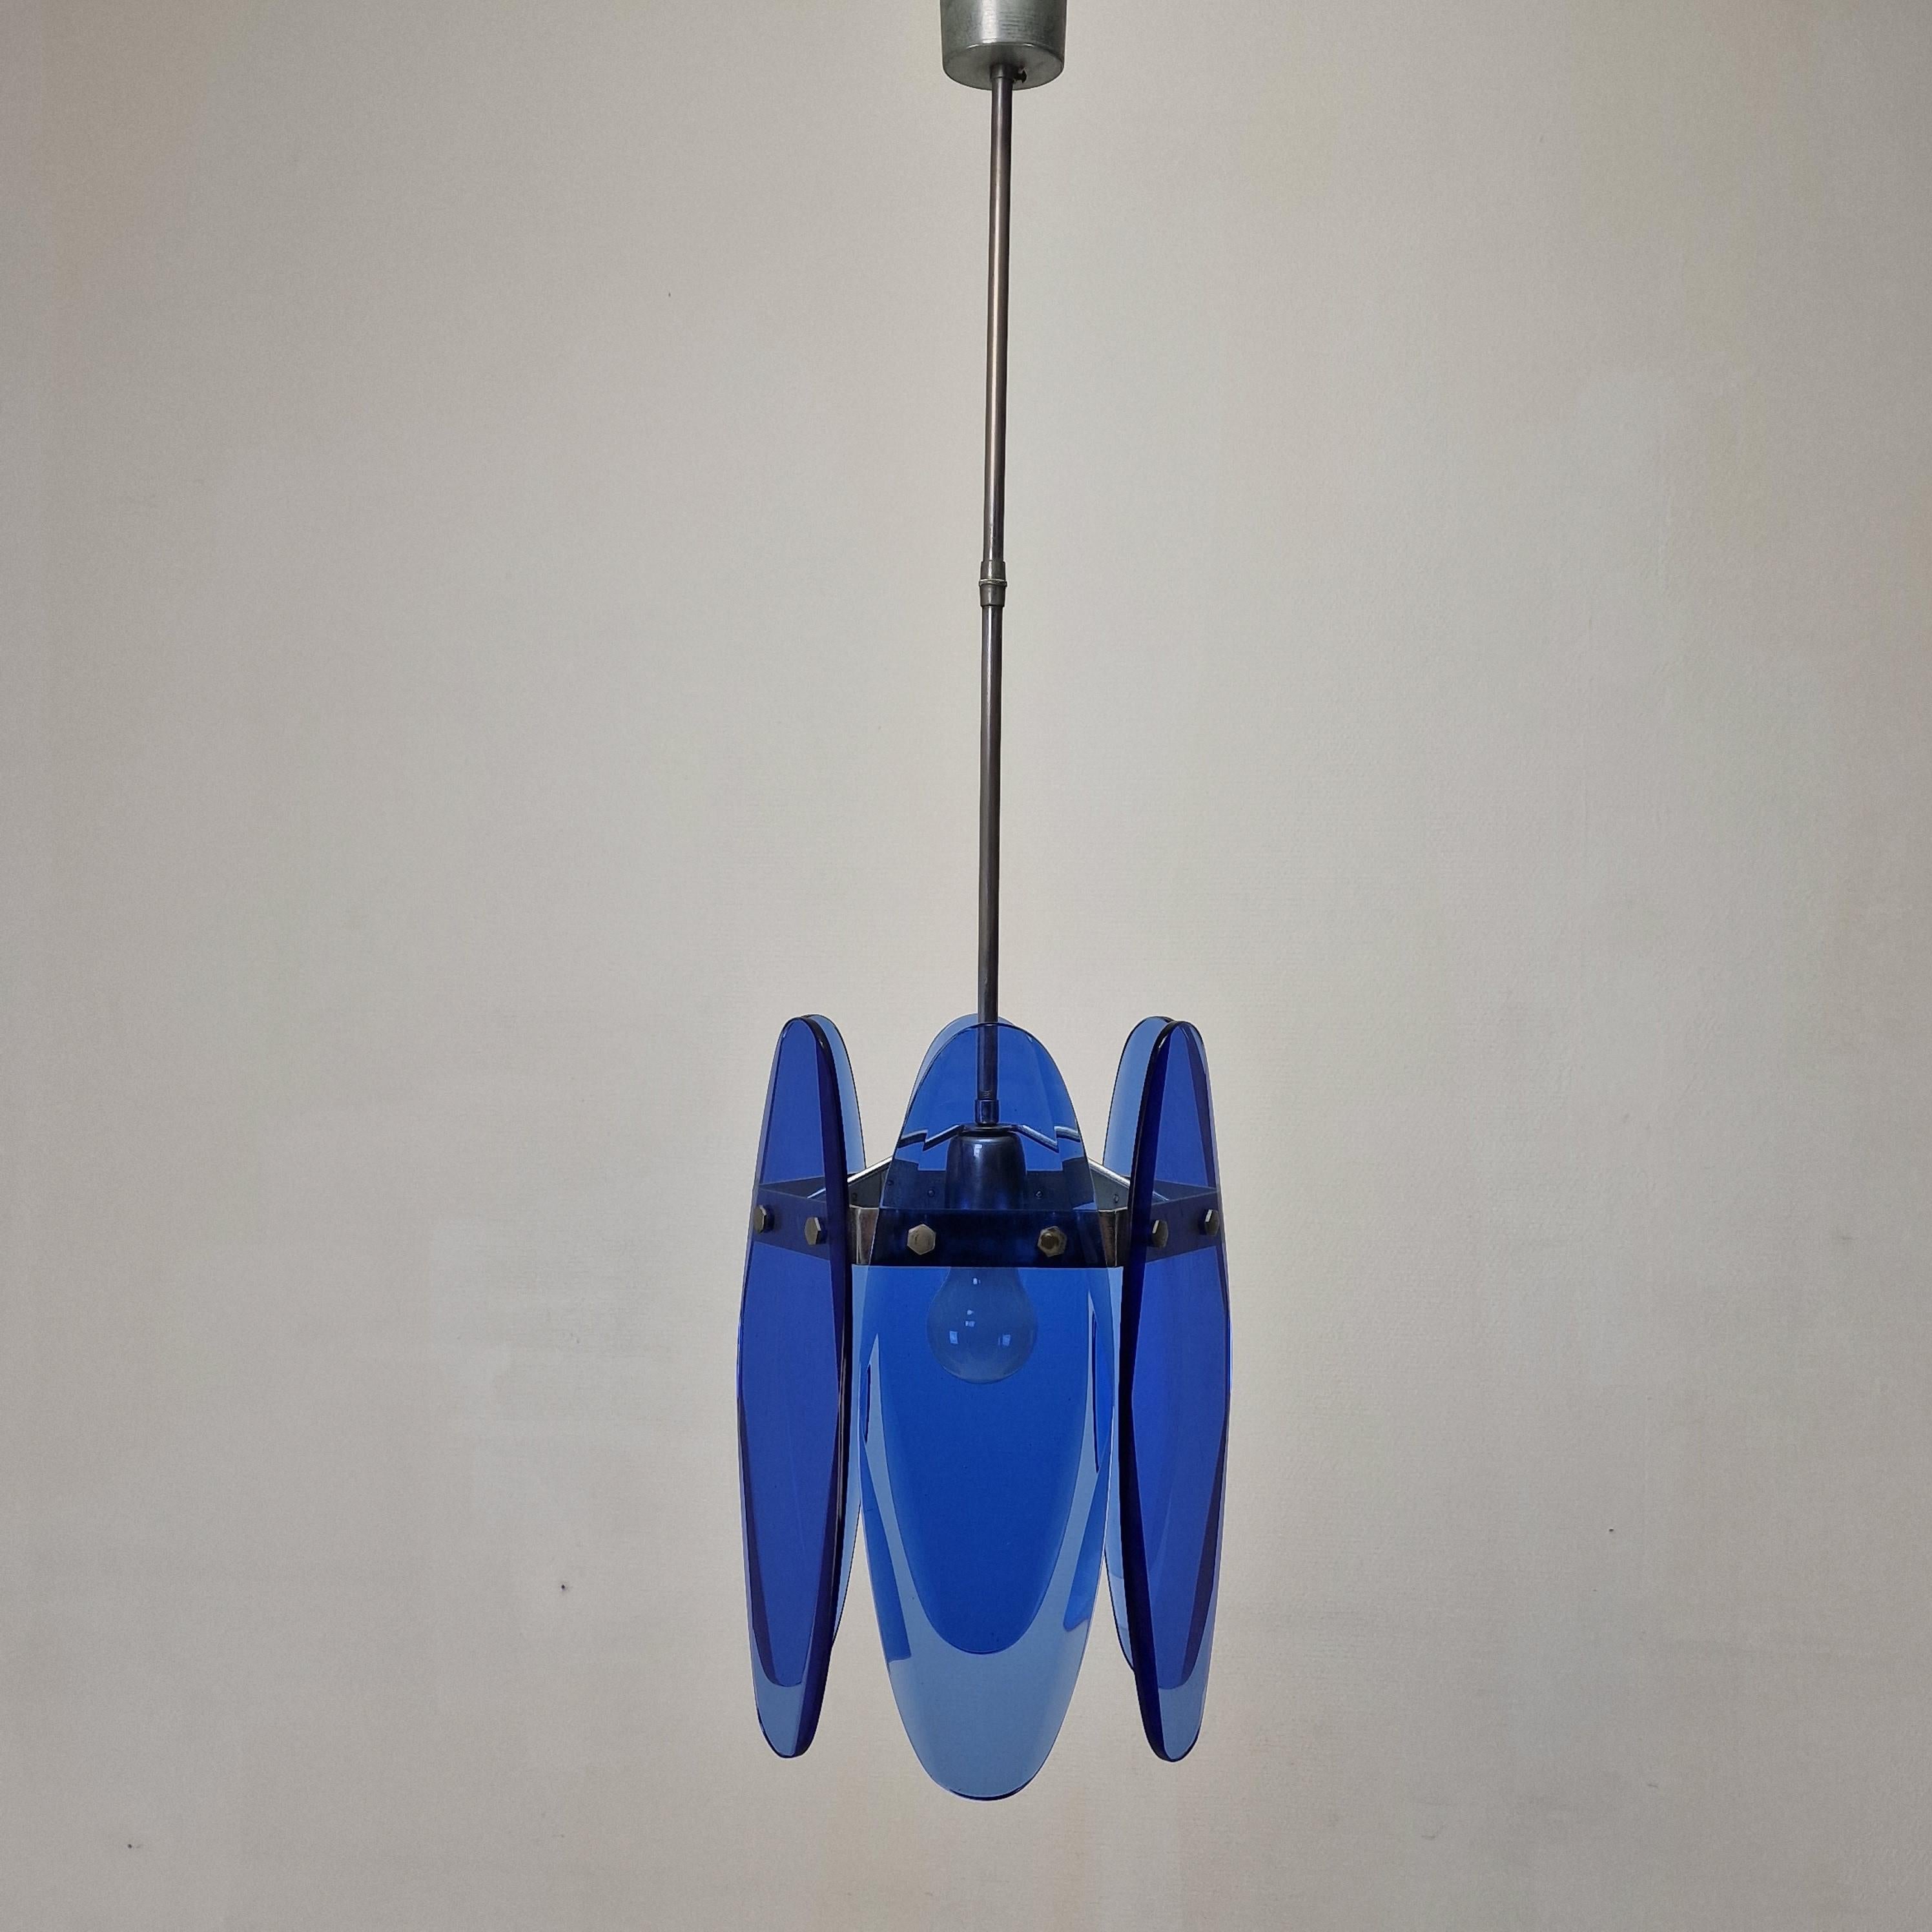 Mid-Century Modern Blue Glass Chandelier or Pendant by Veca, Italy 1970's For Sale 3